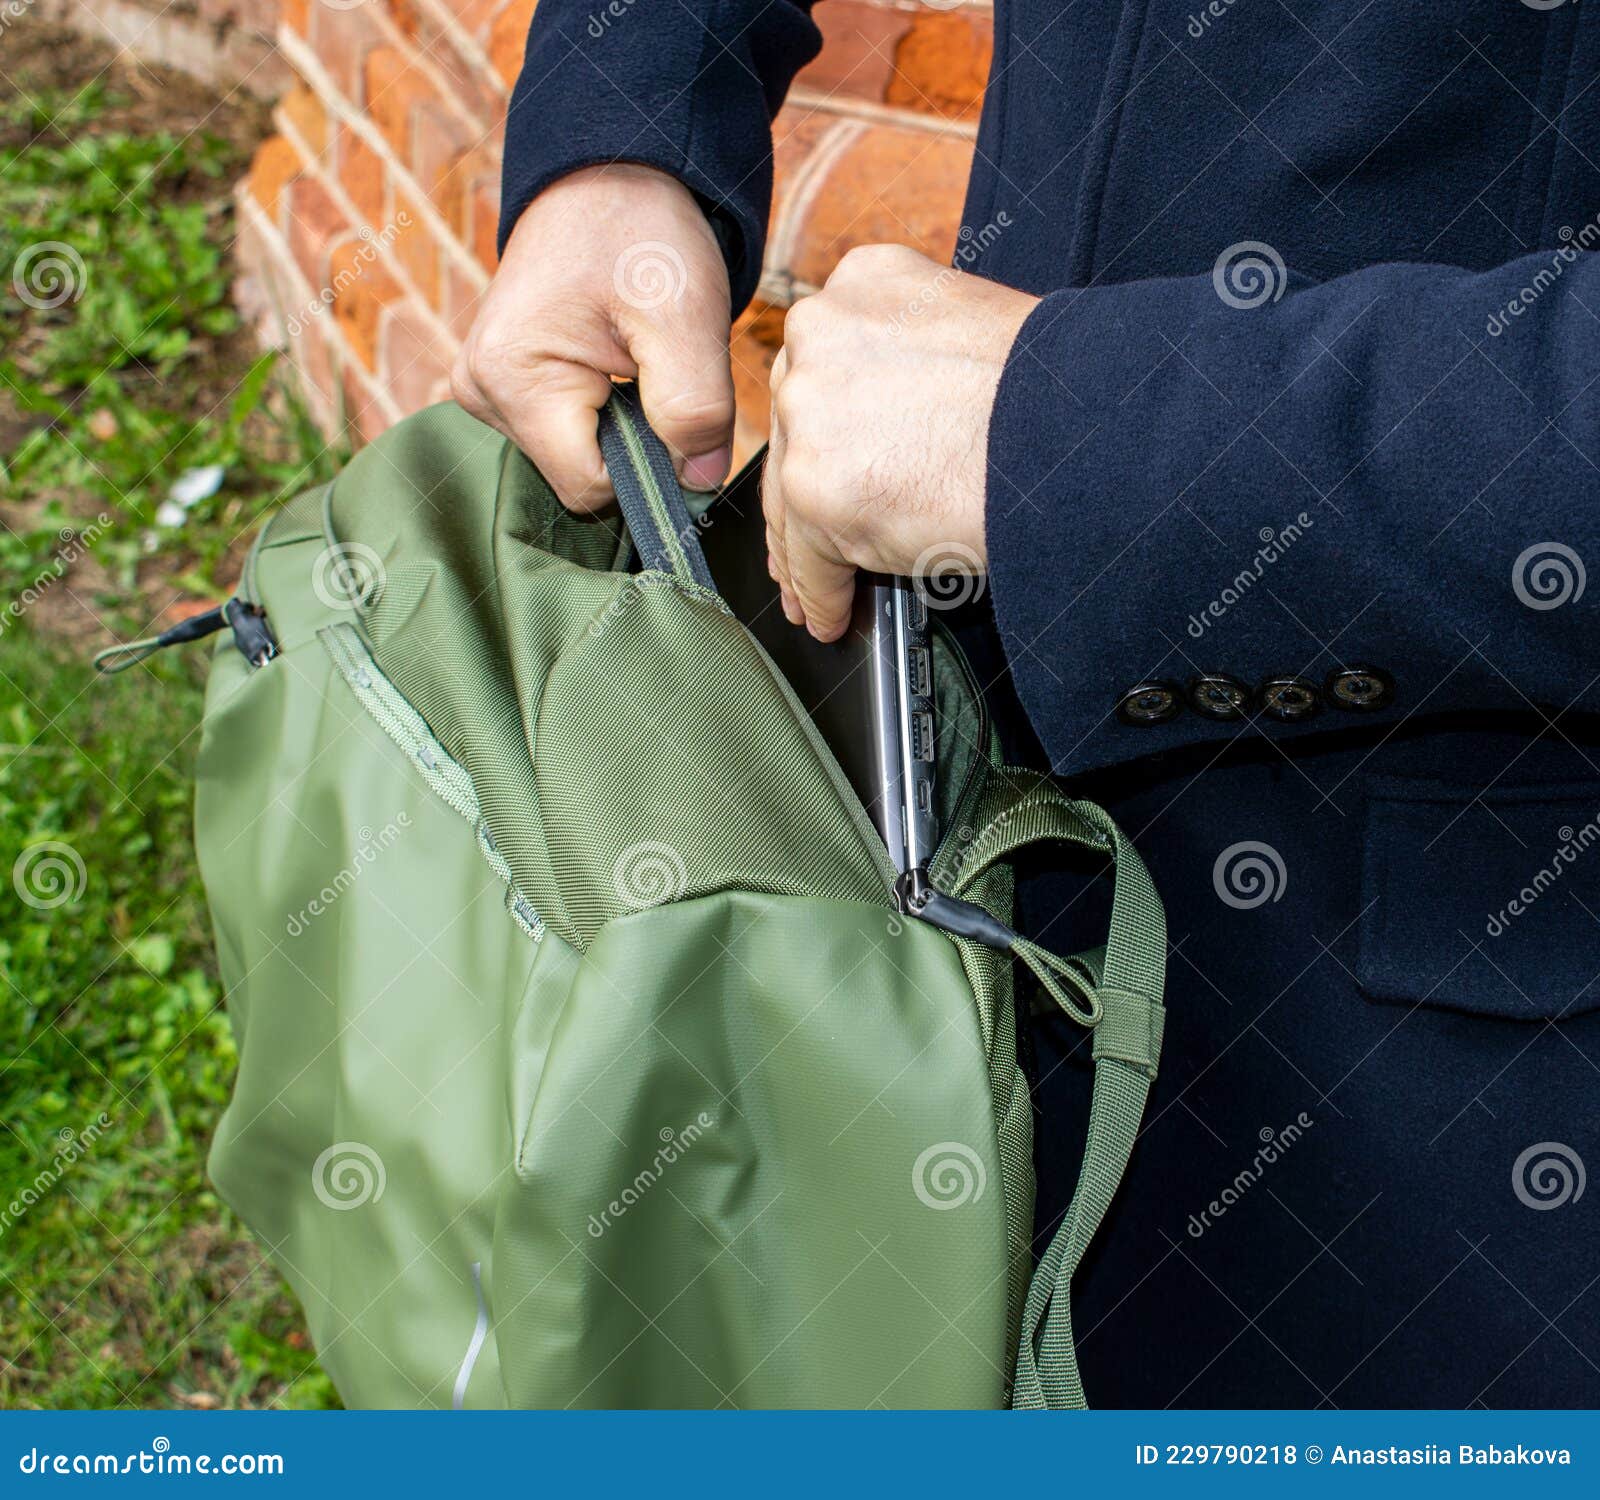 A Man Holds a Bag by the Handle and Takes Out a Laptop. Universal City Sports  Bag in Khaki Color. Stock Photo - Image of caucasian, background: 229790218